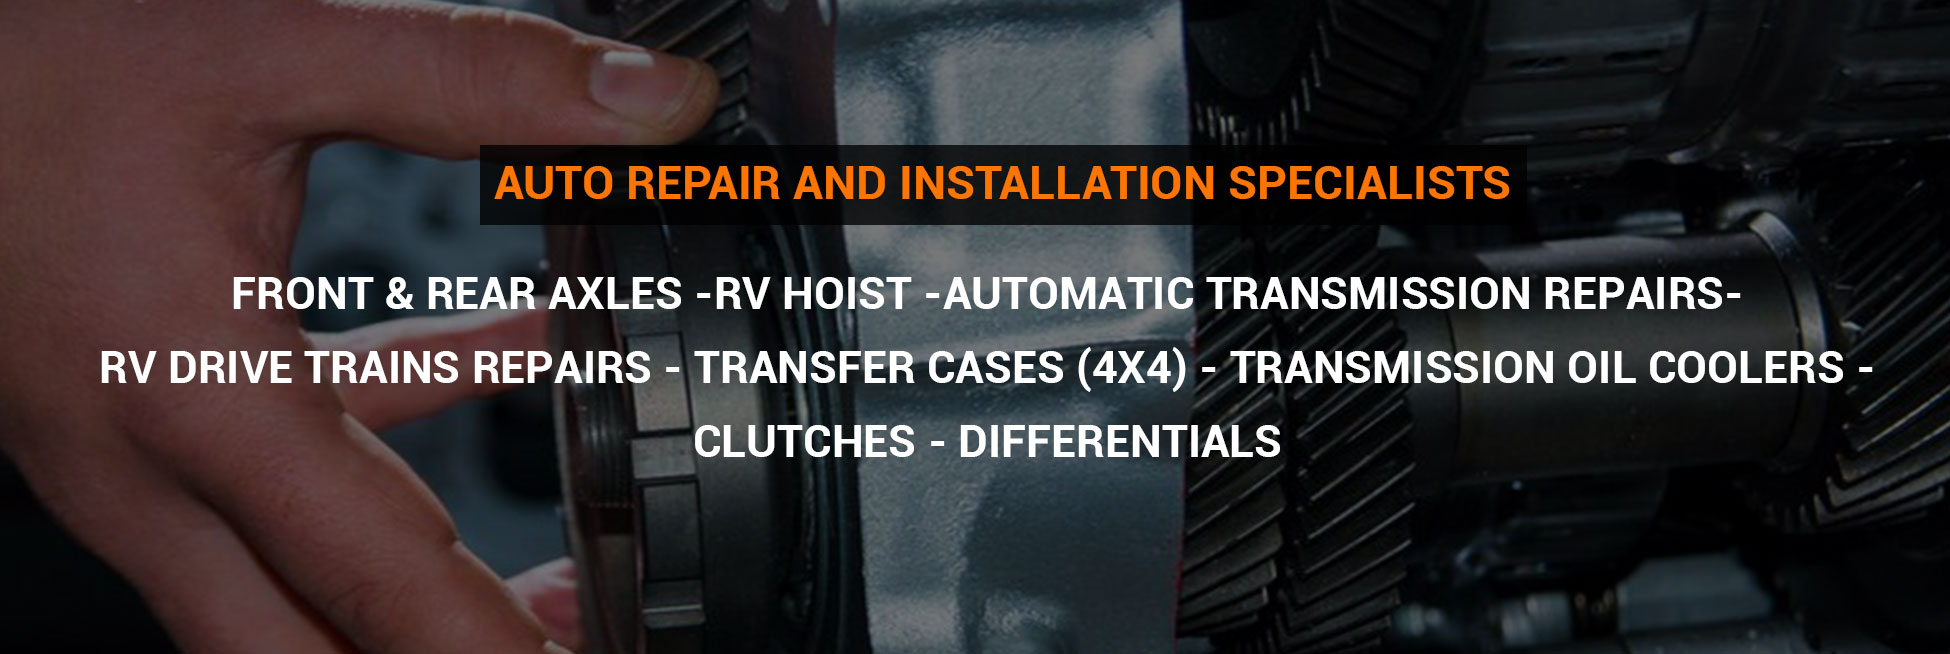 Auto Repair and Installation Specialists